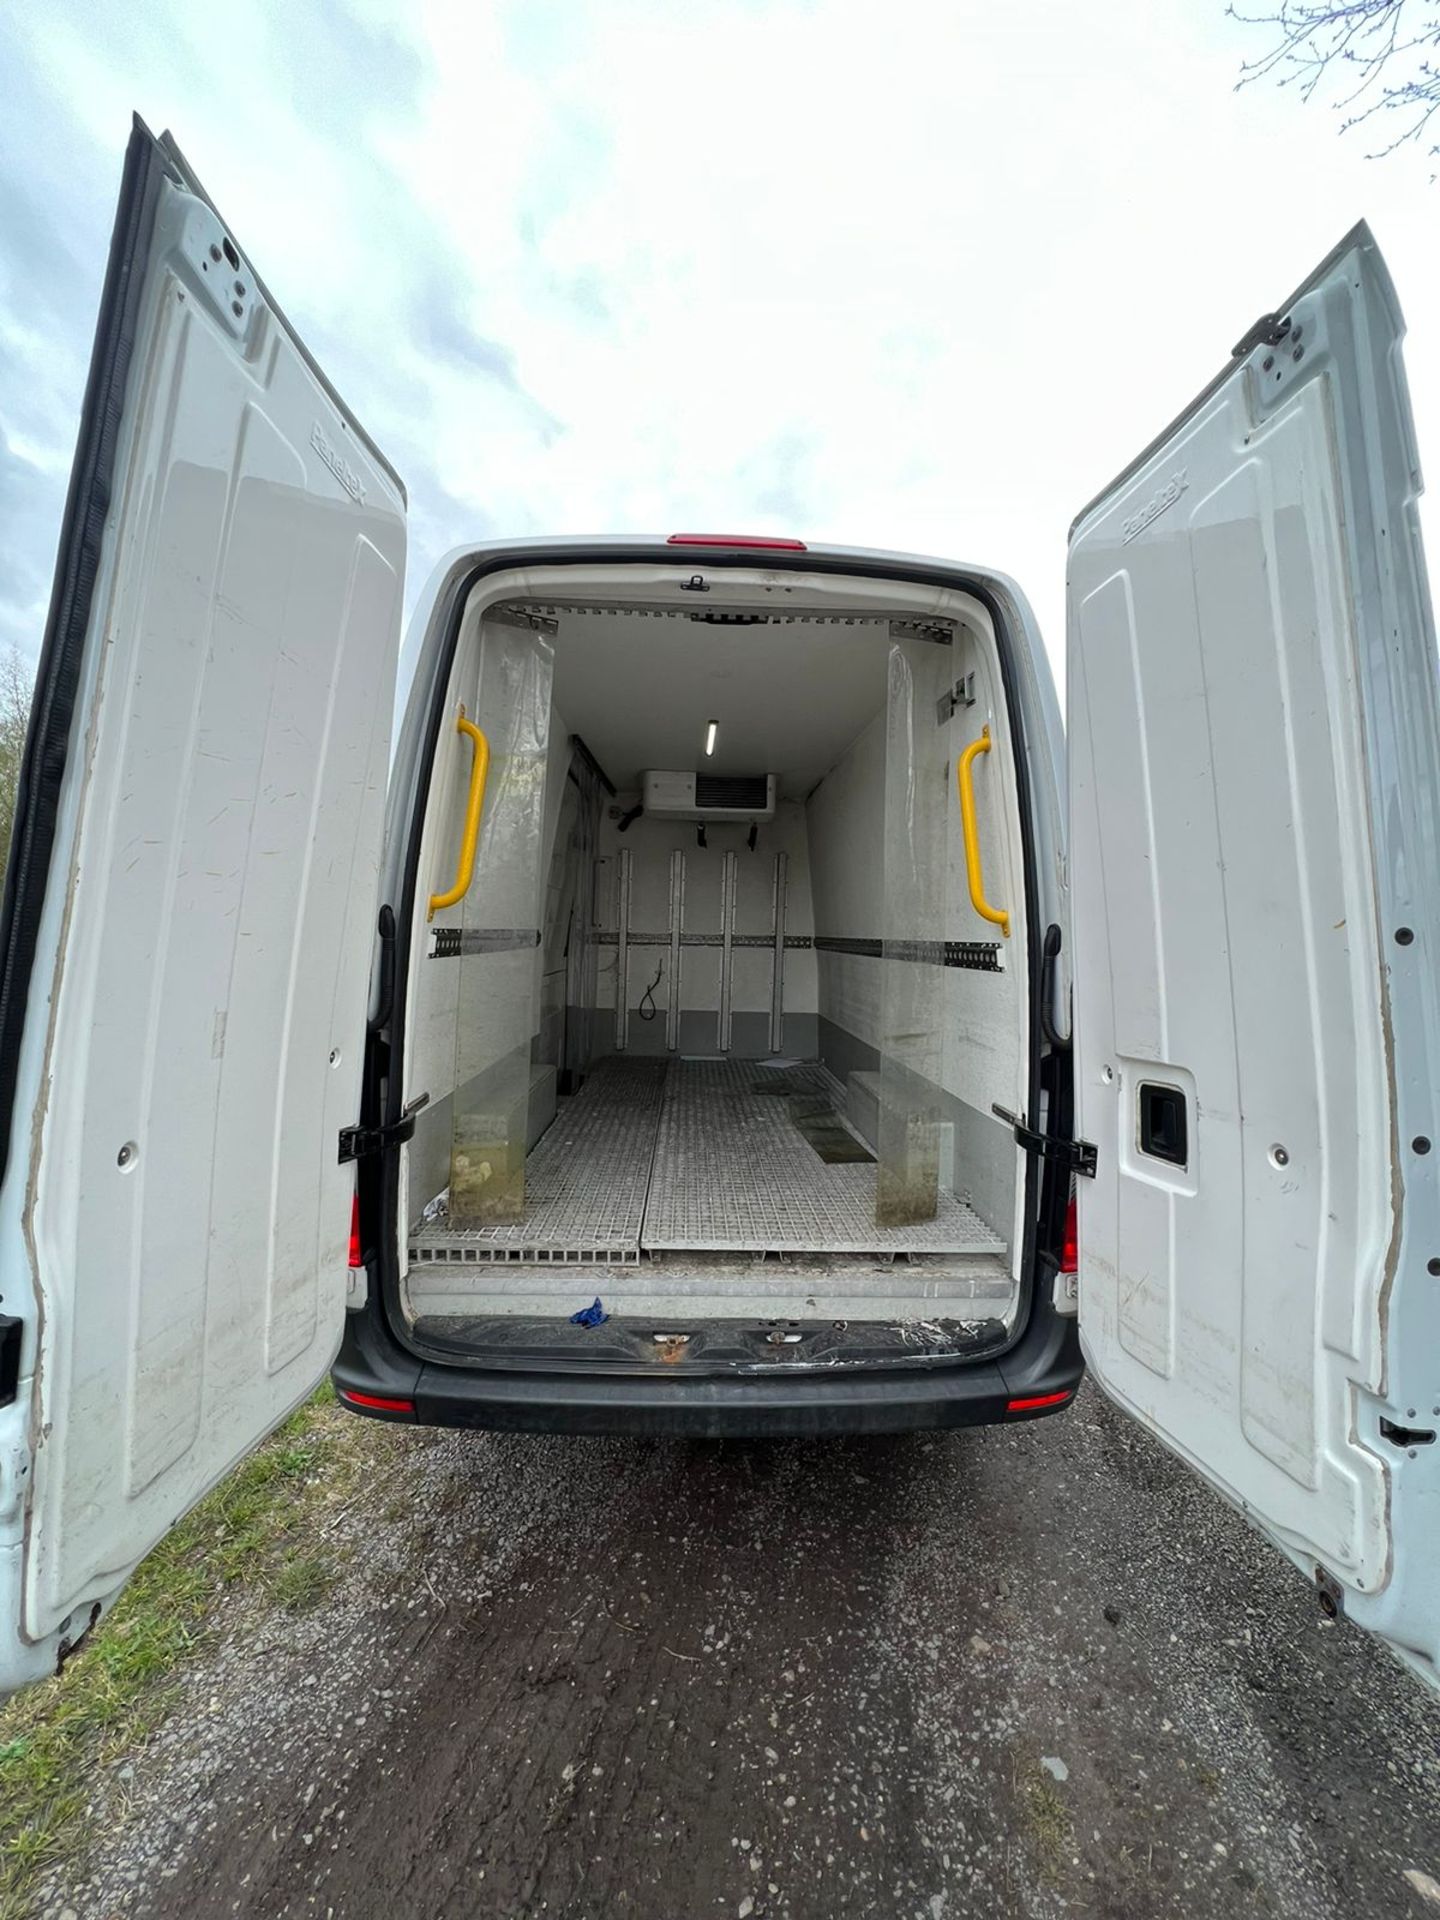 MERCEDES SPRINTER 314CDI AIR CONDITIONING - Image 4 of 22